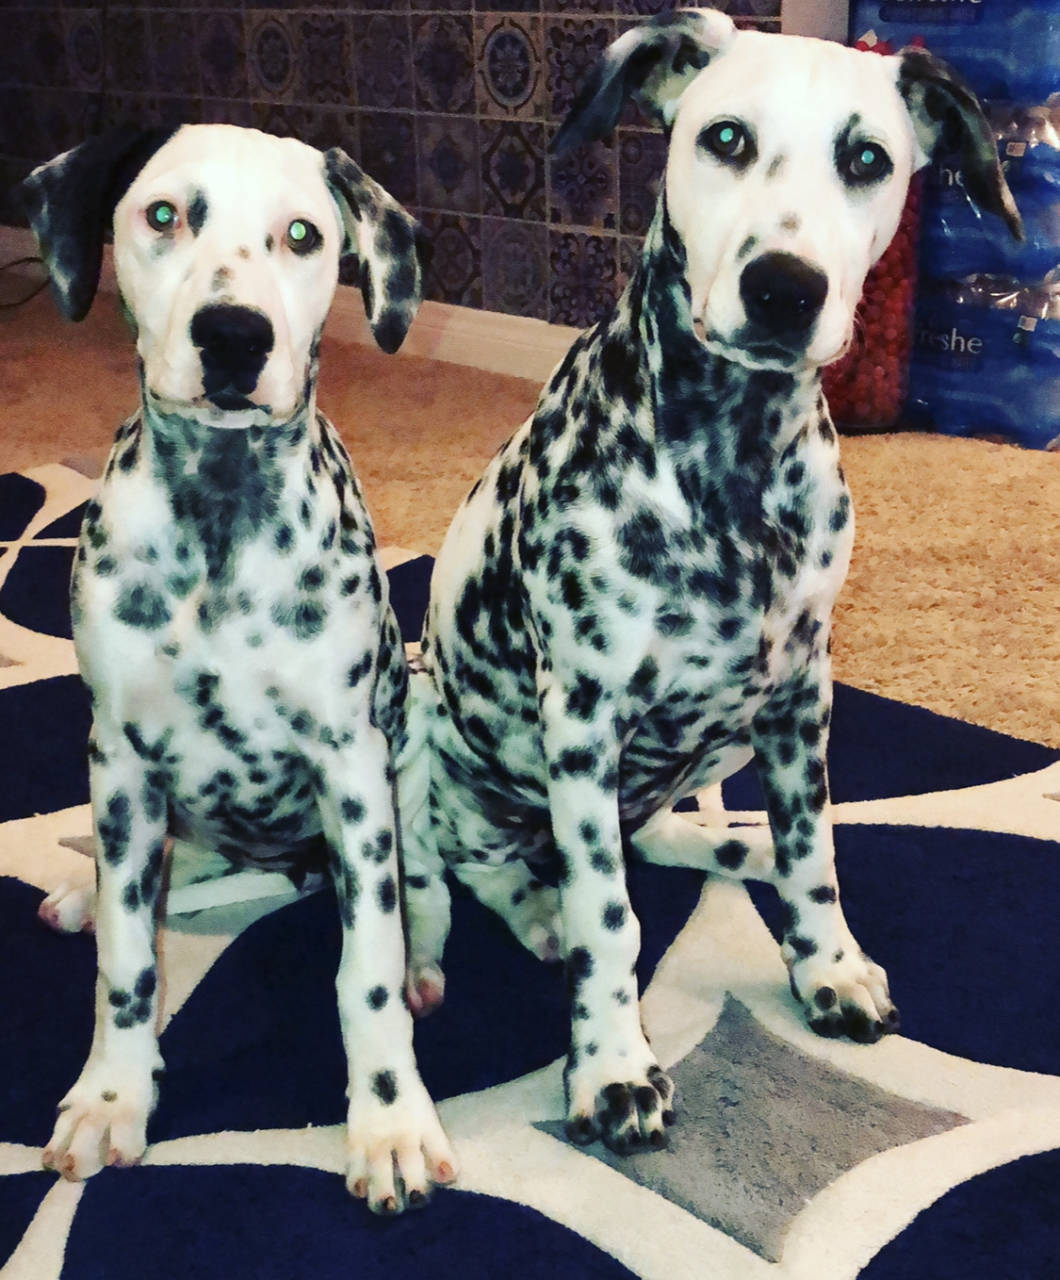 Dalmatian named Penny & Patches